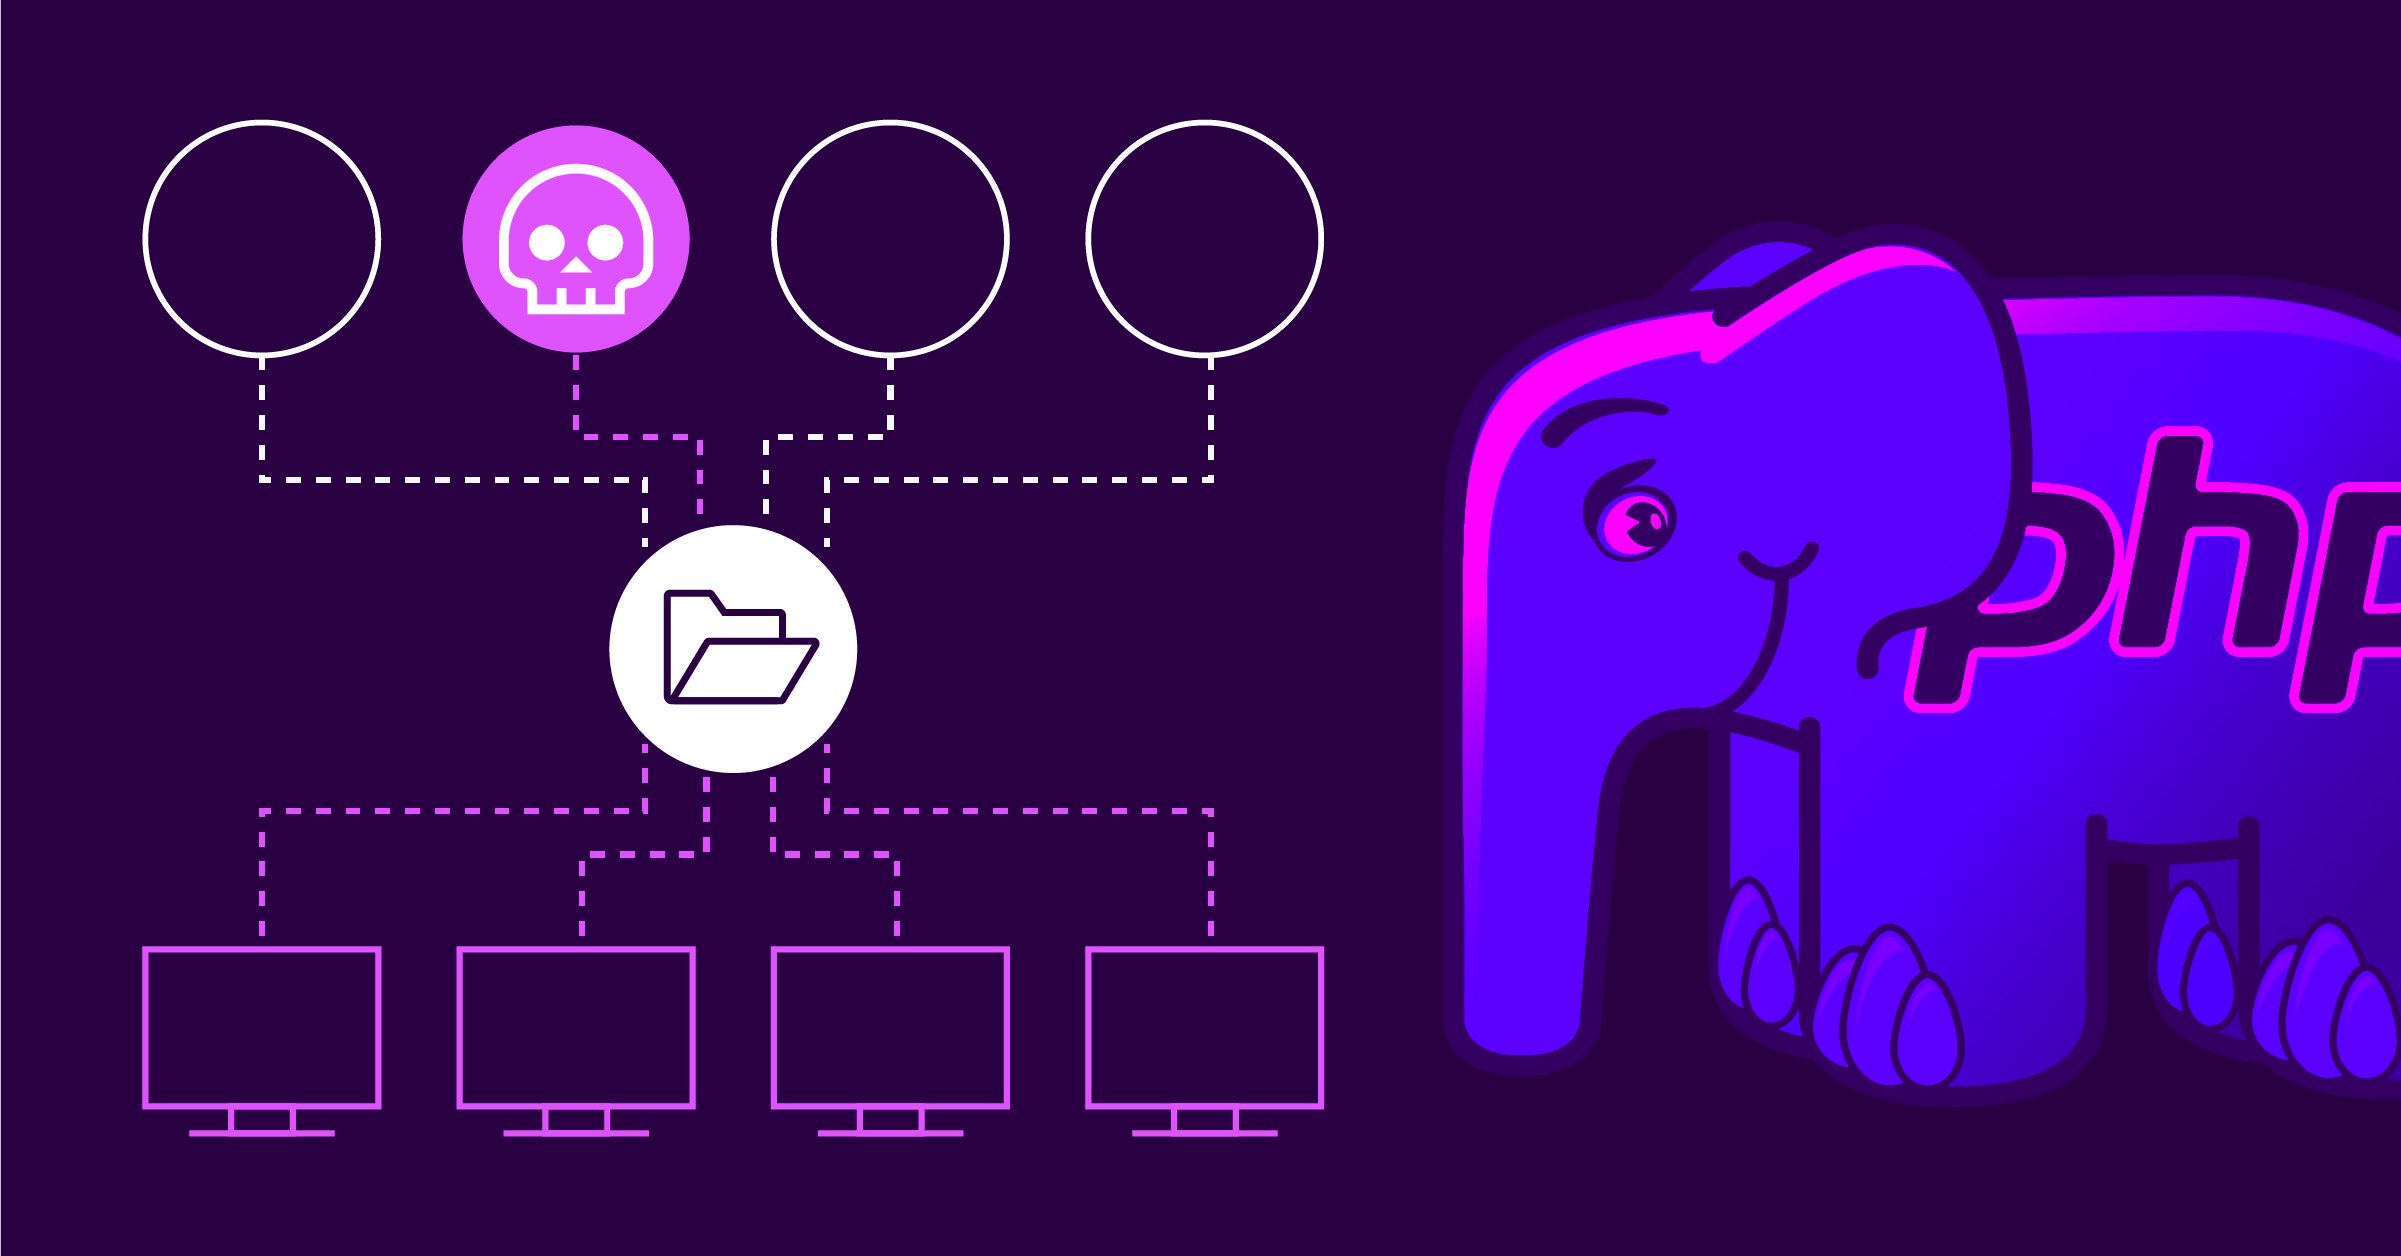 What is your worst supply chain nightmare and why is it somebody that could take over all the PHP packages at once? Let's deep dive into how we could demonstrate it!